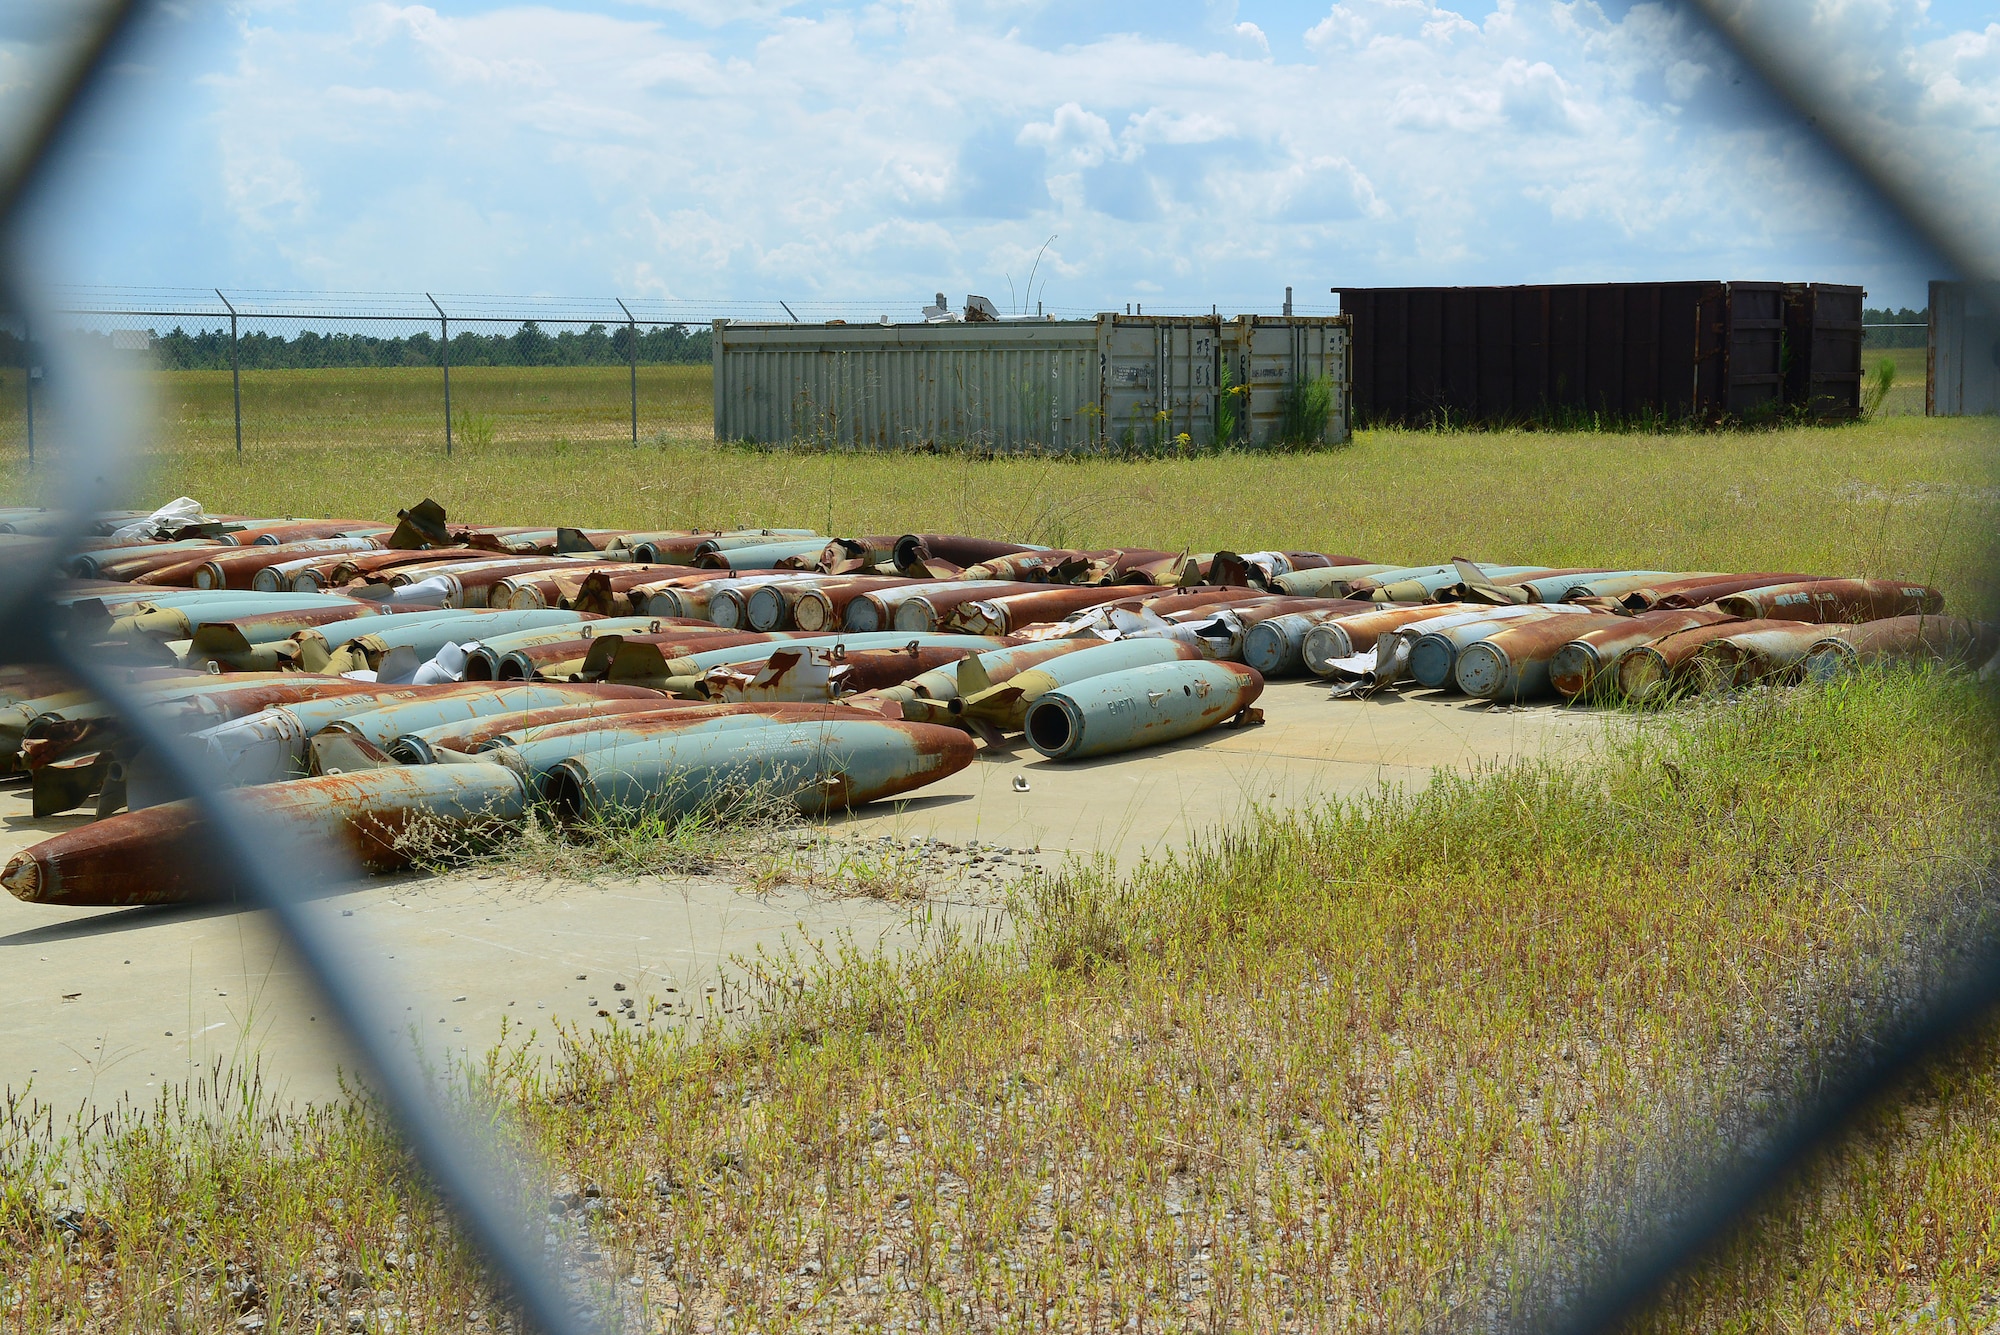 Munitions cleared of all hazards wait to be made into scrap metal at Poinsett Electronic Combat Range, Sumter, S.C., Sept. 4, 2014. Every six months, explosive ordnance disposal Airmen remove any explosive hazards and clear the range of all munitions. (U.S. Air Force photo by Airman 1st Class Diana M. Cossaboom/Released)